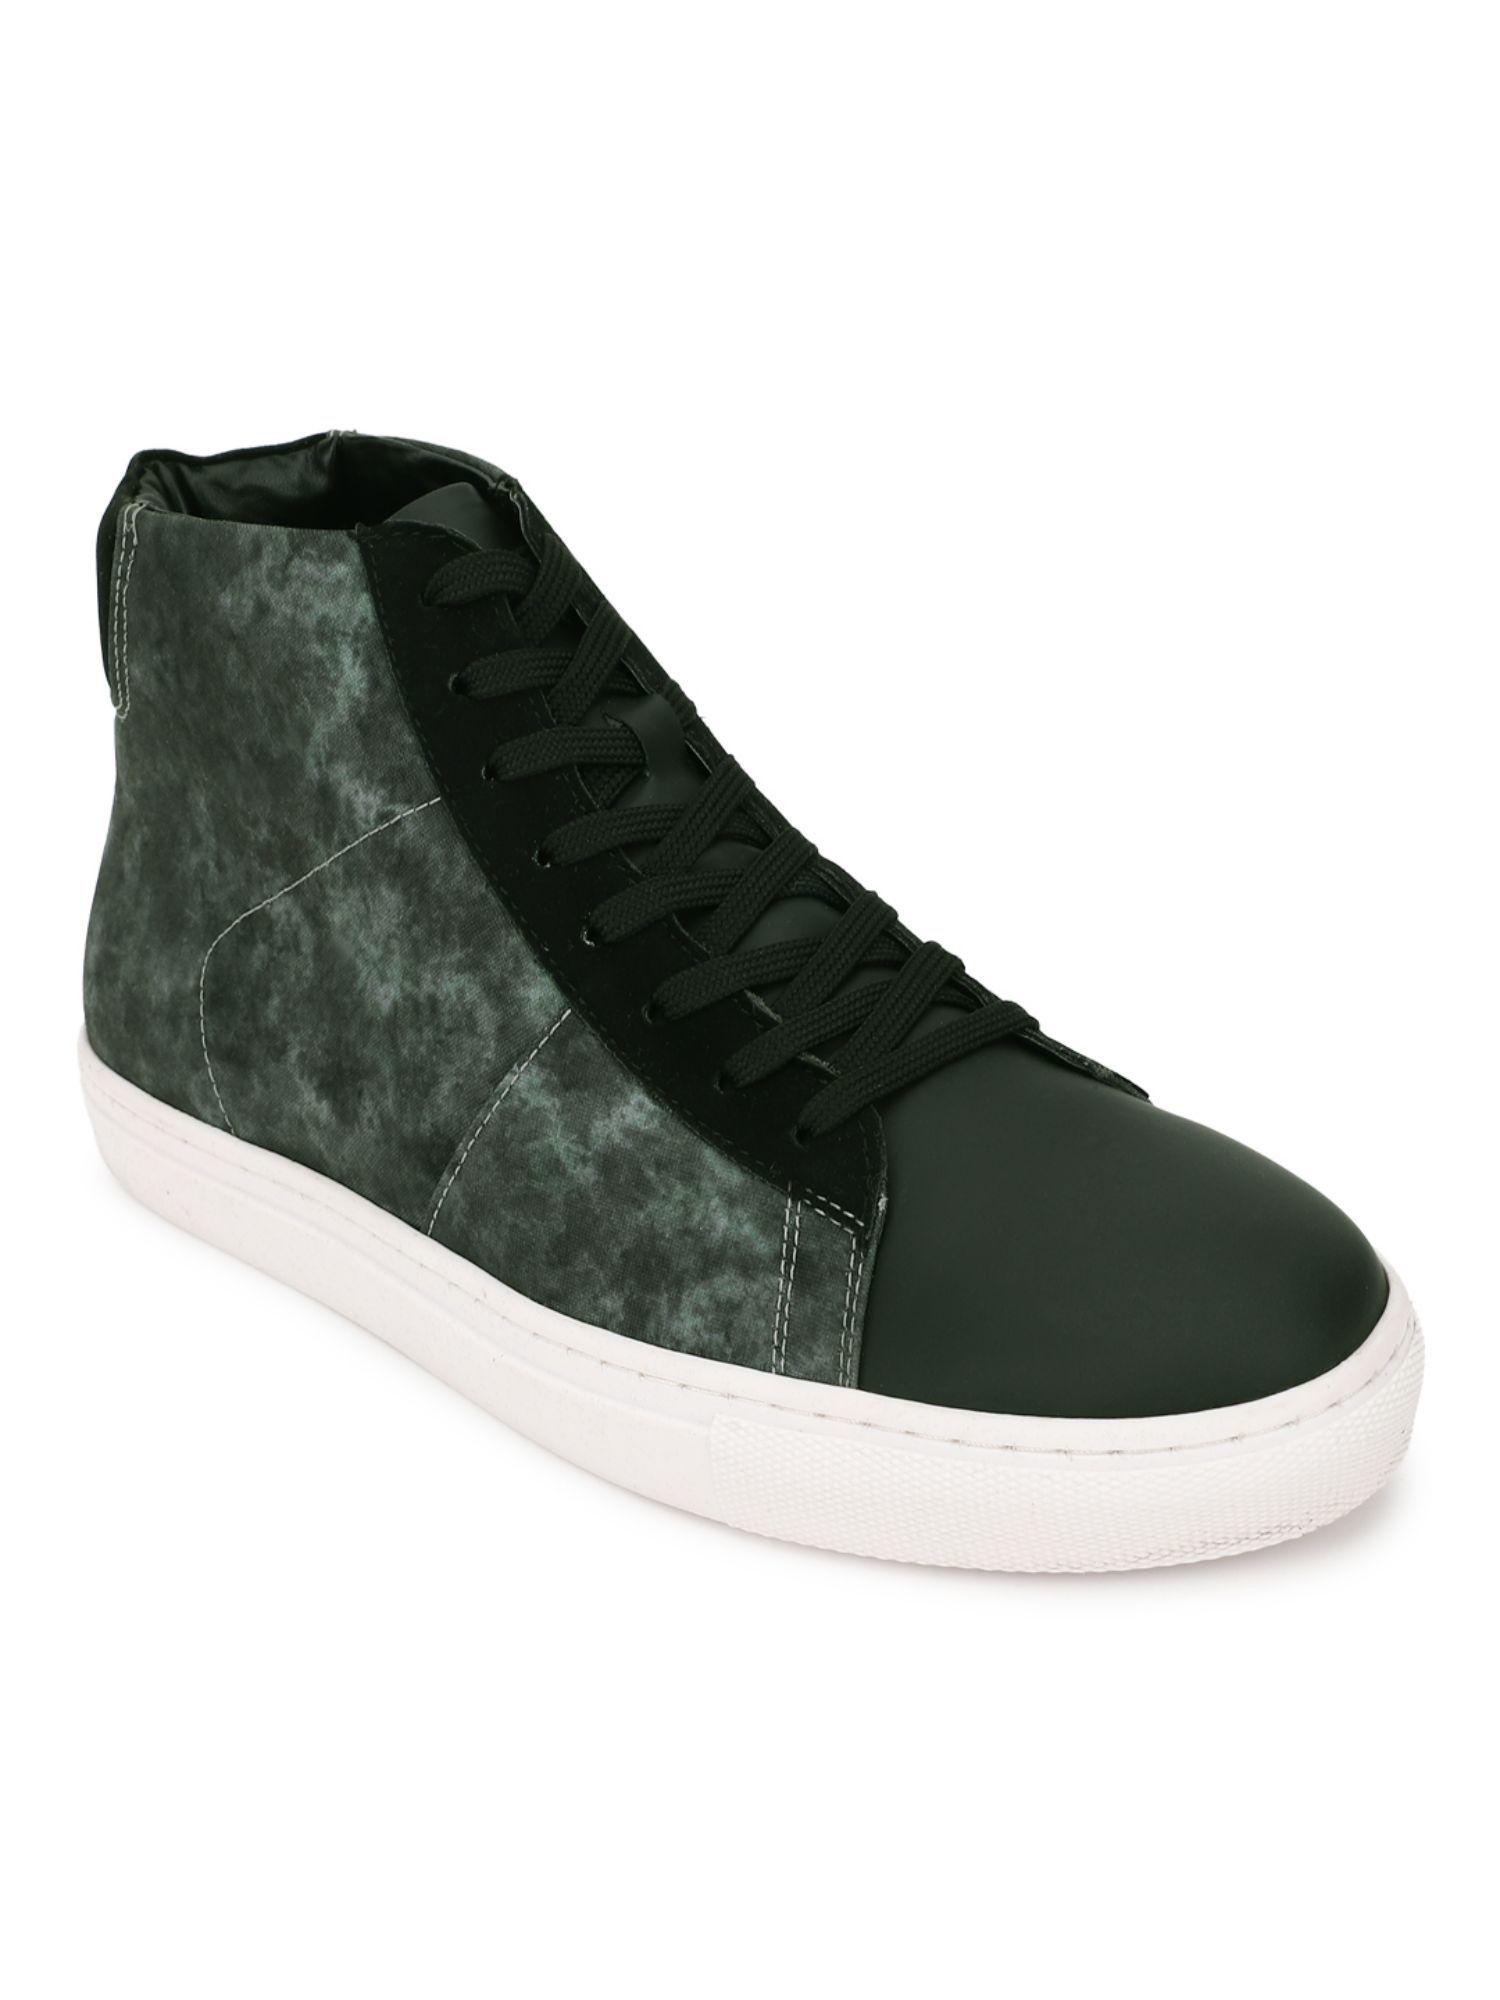 solid green sneakers